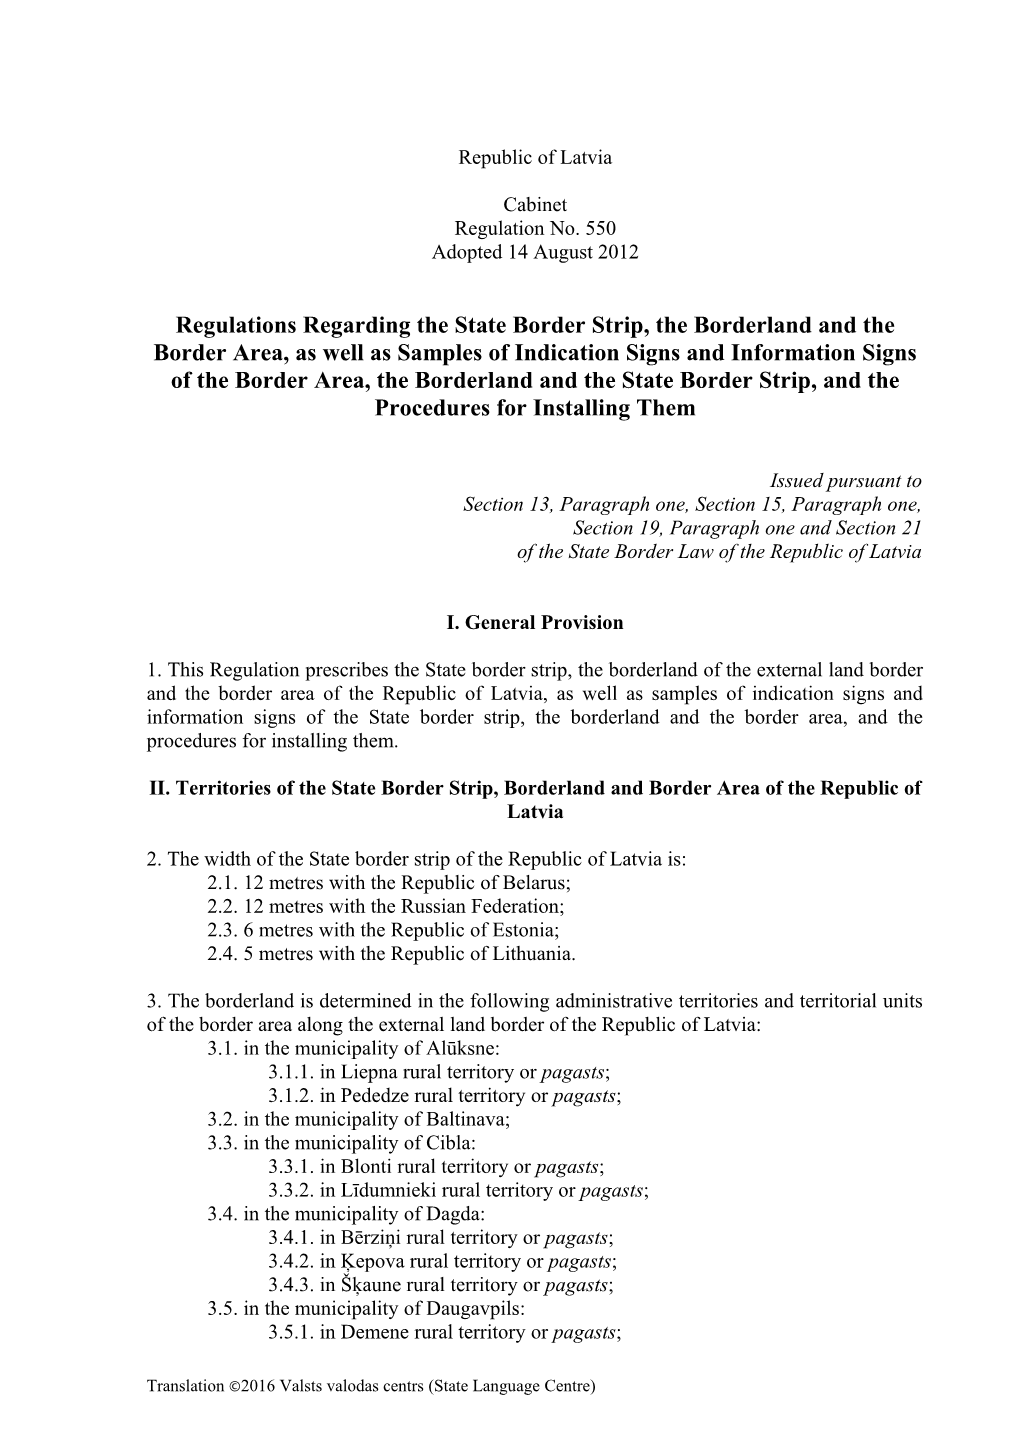 Regulations Regarding the State Border Strip, the Borderland and the Border Area, As Well